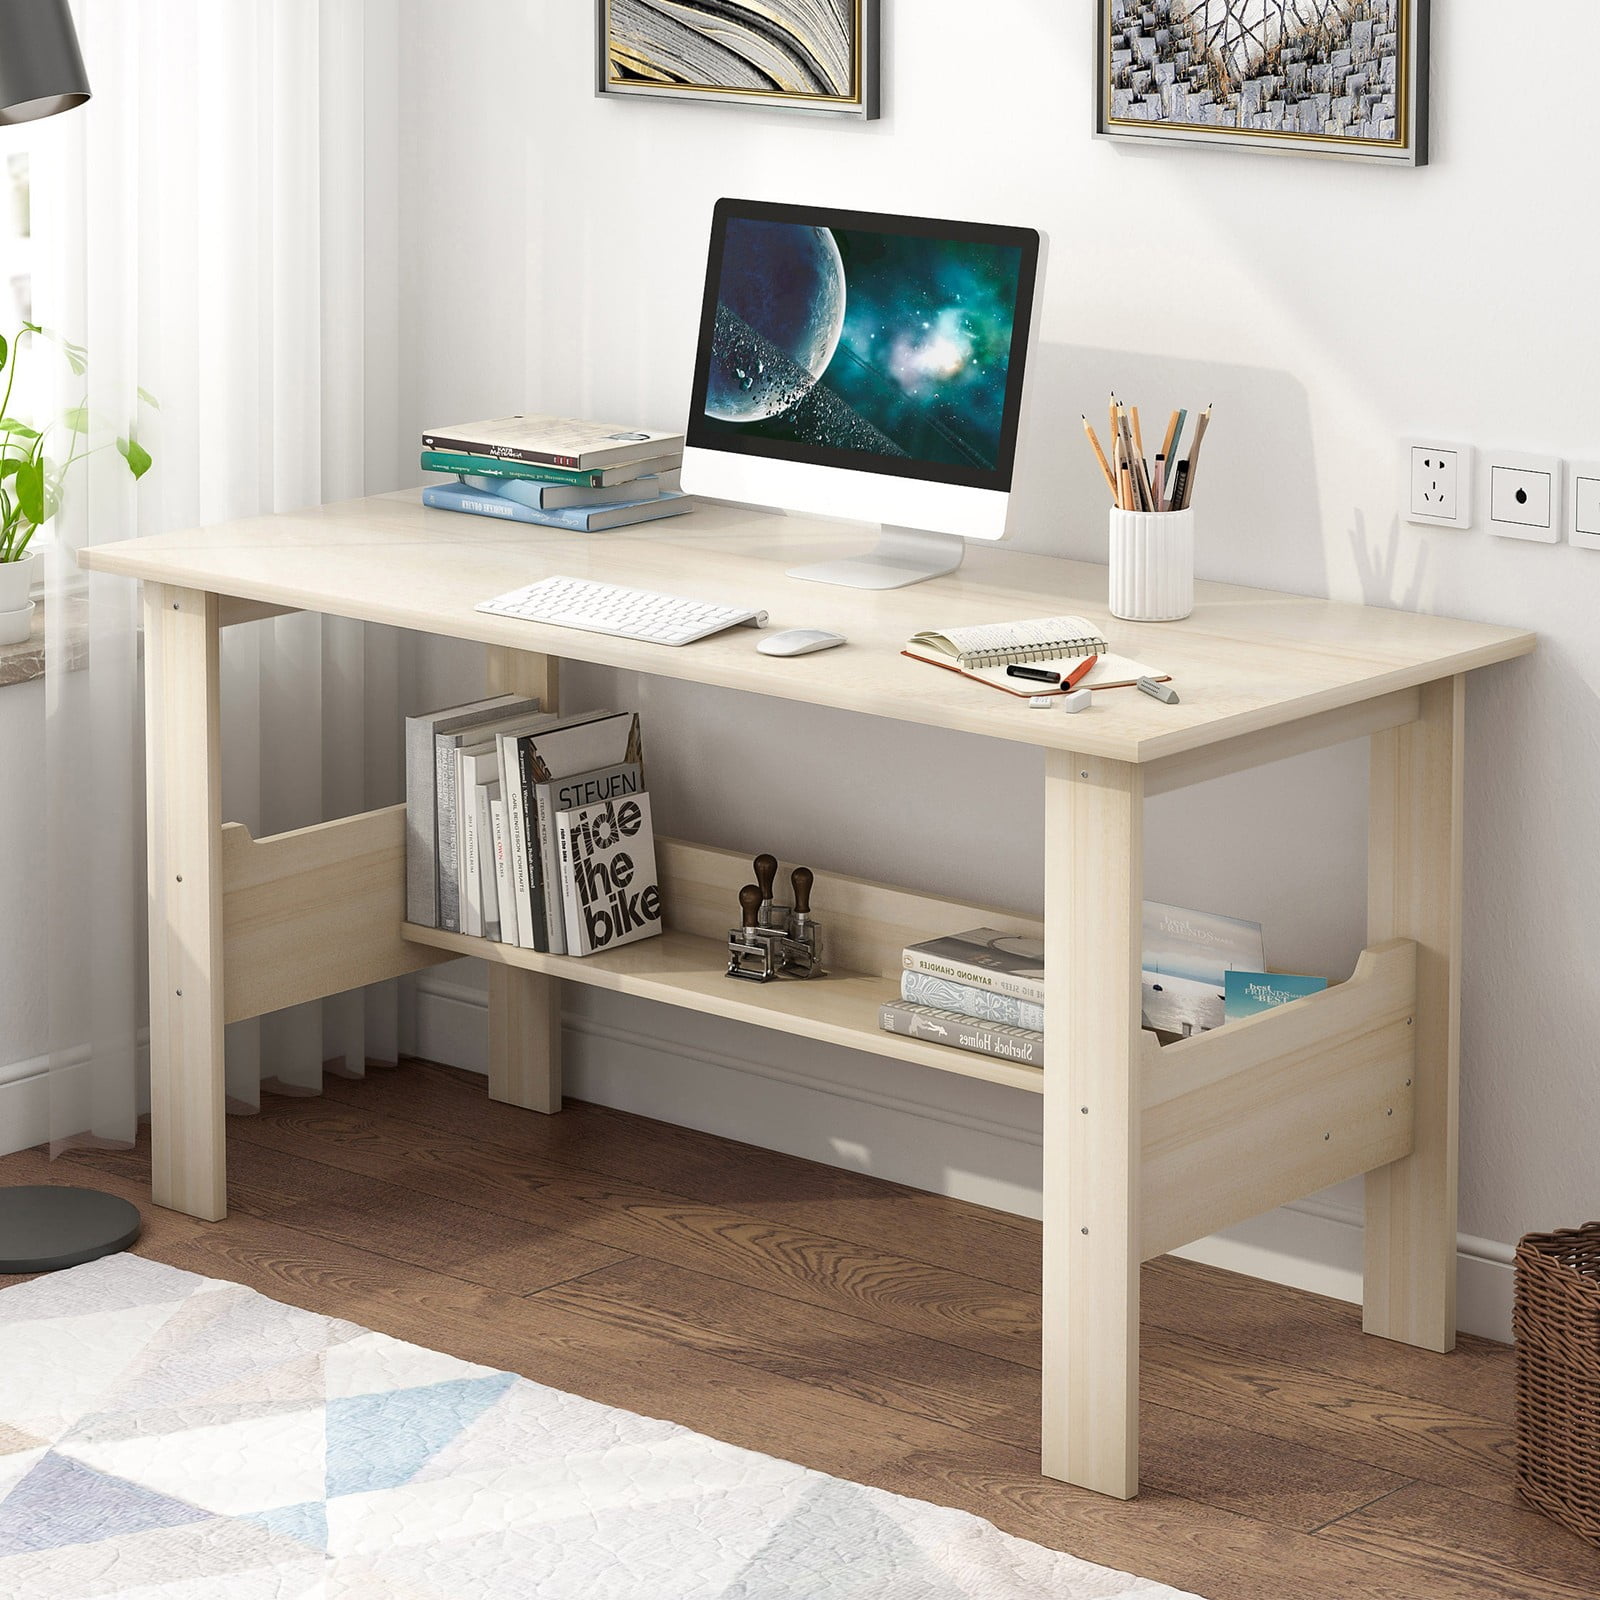 Details about   Wood Computer Desk PC Laptop Table Workstation Study Home Office Furniture USA 